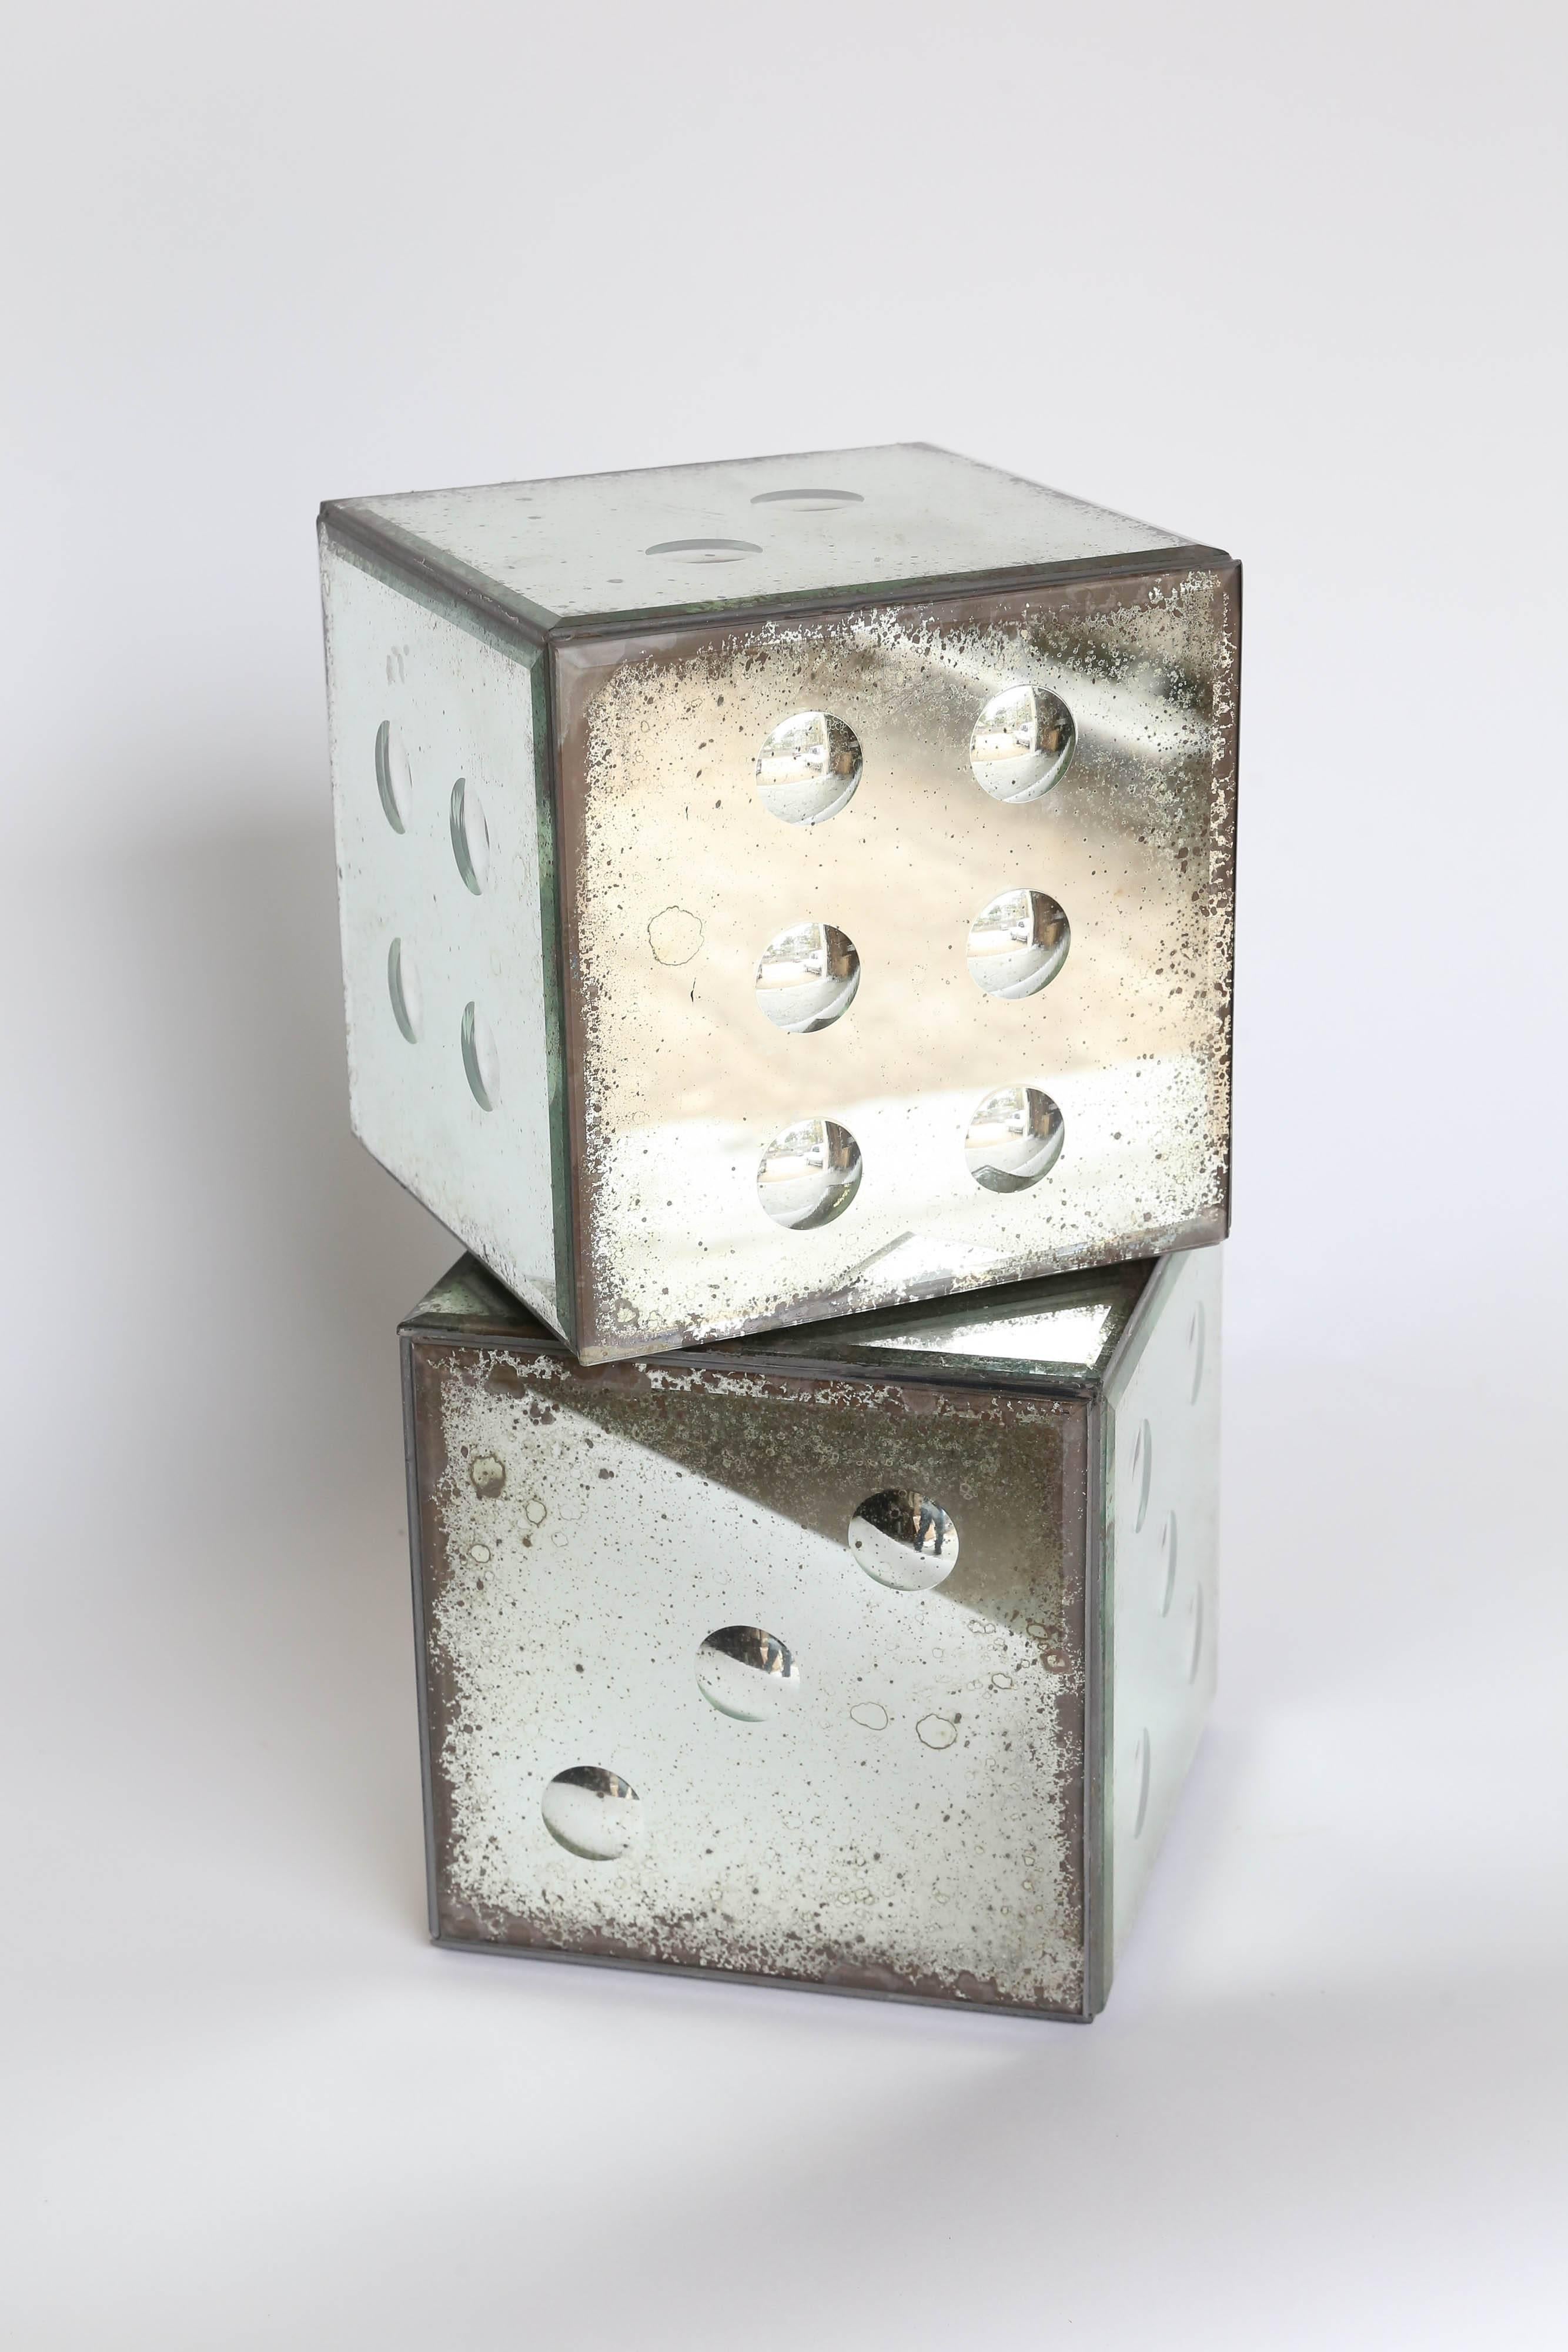 A pair of mirrored dice found in France that are a sure bet. Eye-catching and with a high touch factor, an odds are in their favour to deliver a spot of fun and interest.